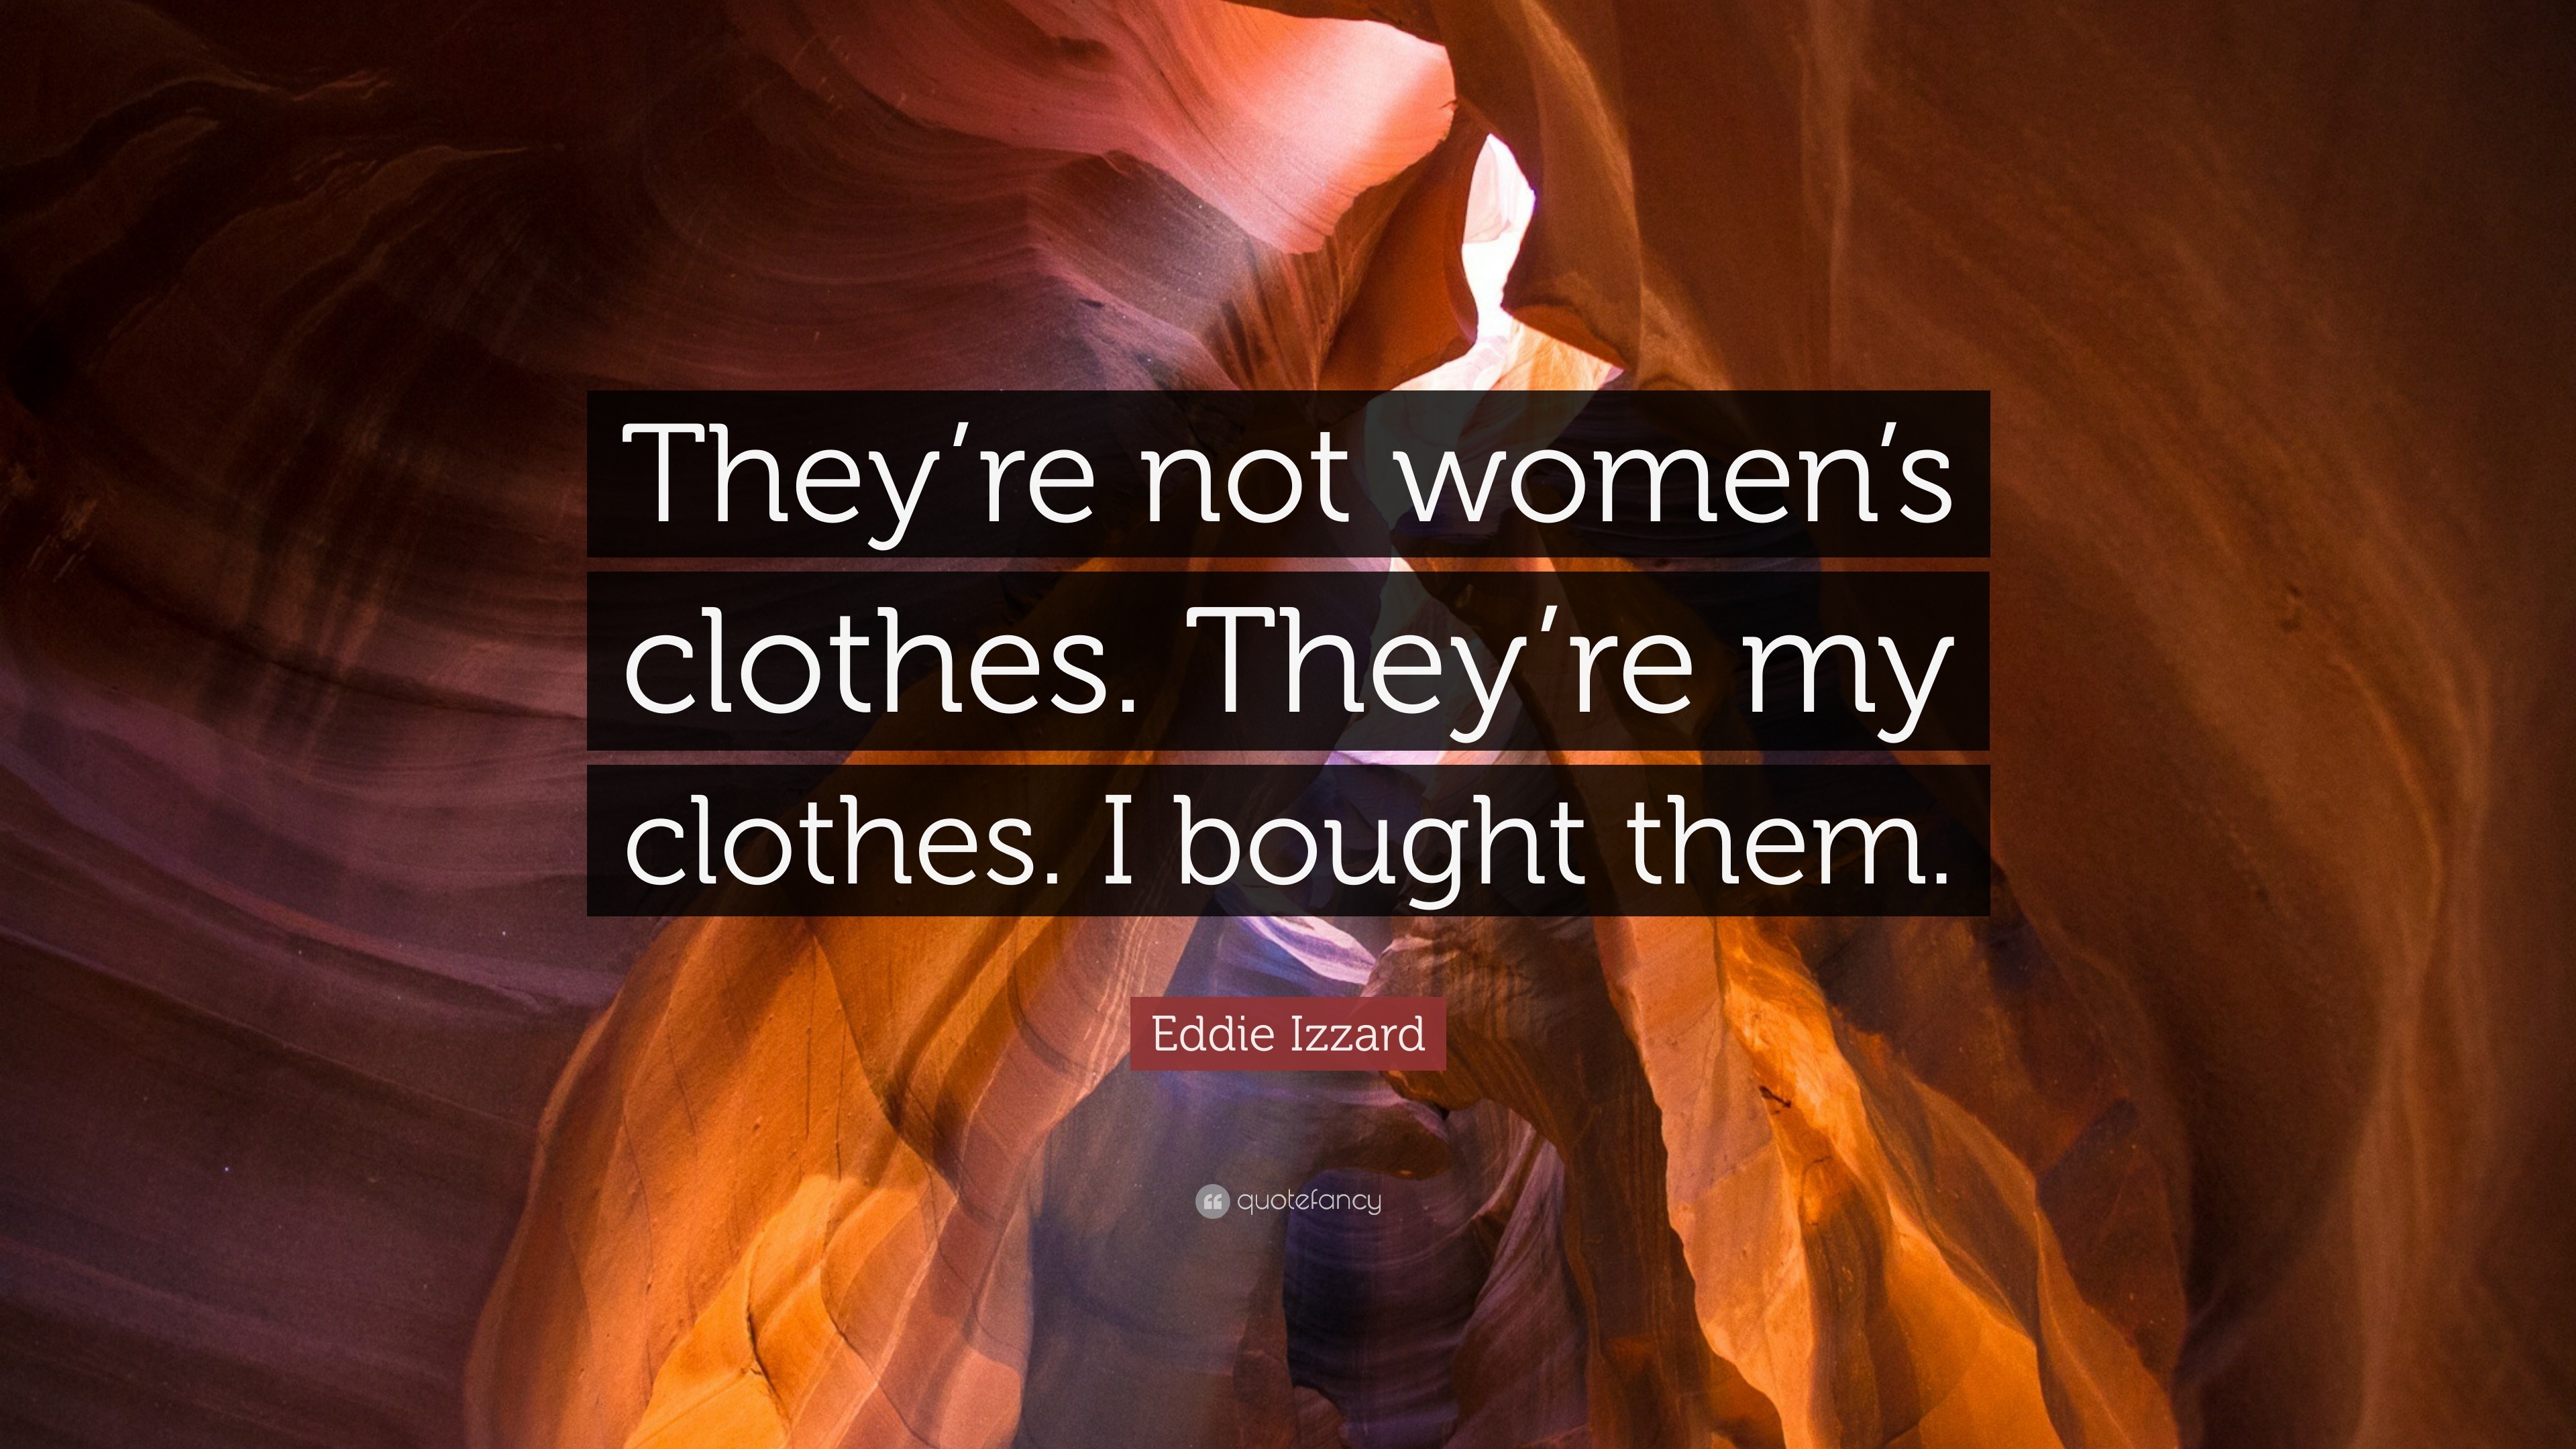 Eddie Izzard Quote: “They're not women's clothes. They're my clothes. I  bought them.”